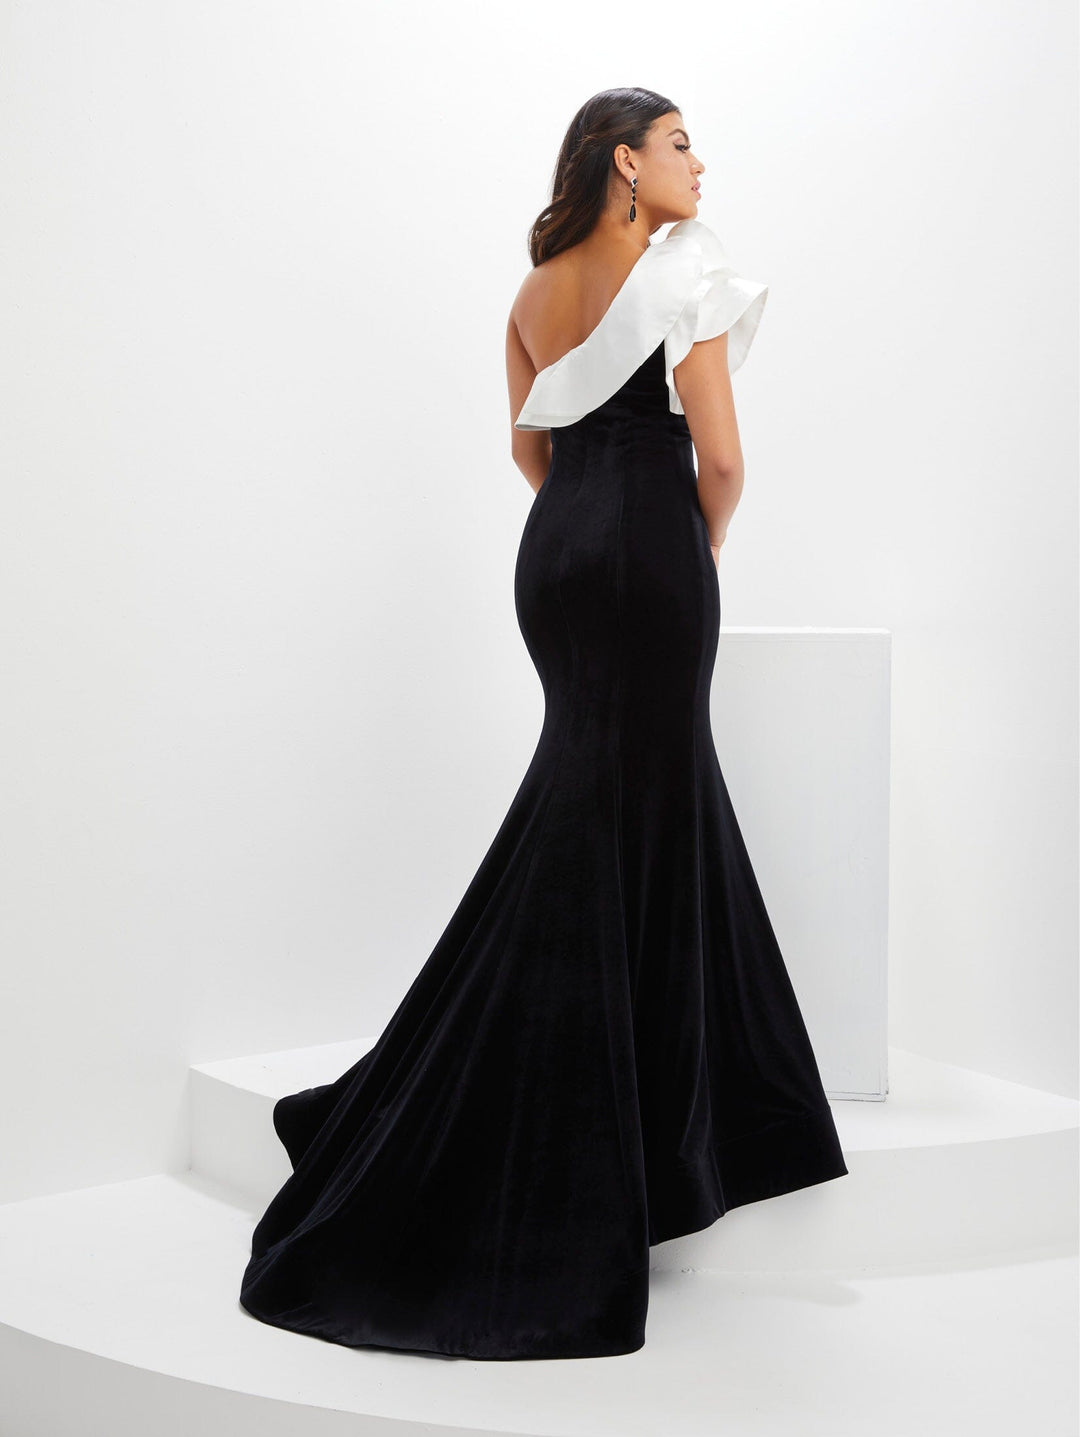 Two Tone One Shoulder Slit Gown by Panoply 14130